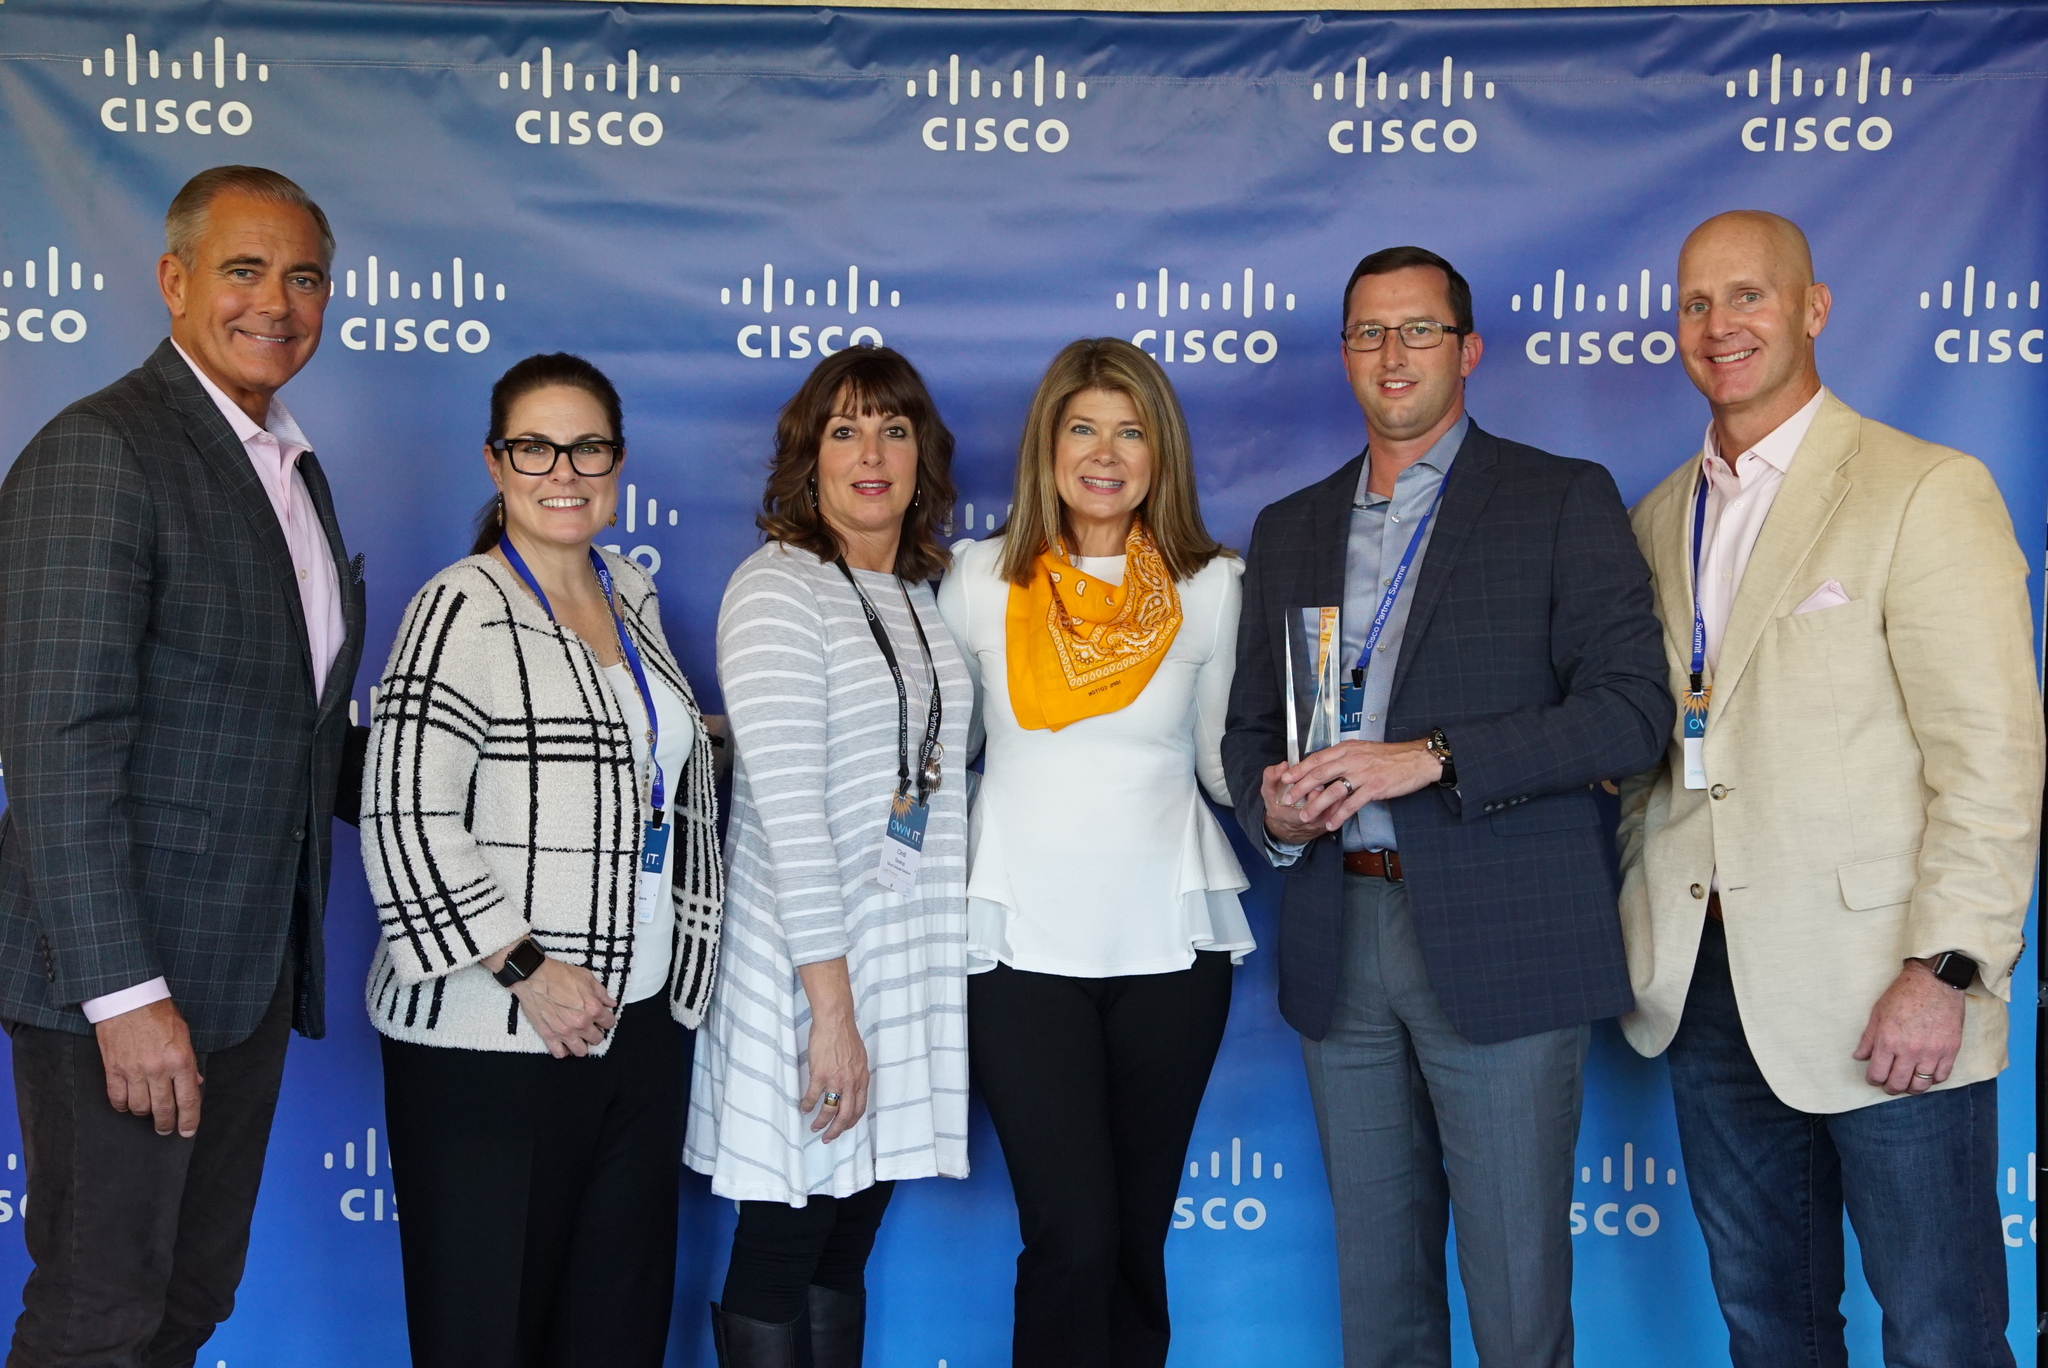 Sirius Receives Geographical Regional Award as Americas Security Partner of the Year at Cisco Partner Summit